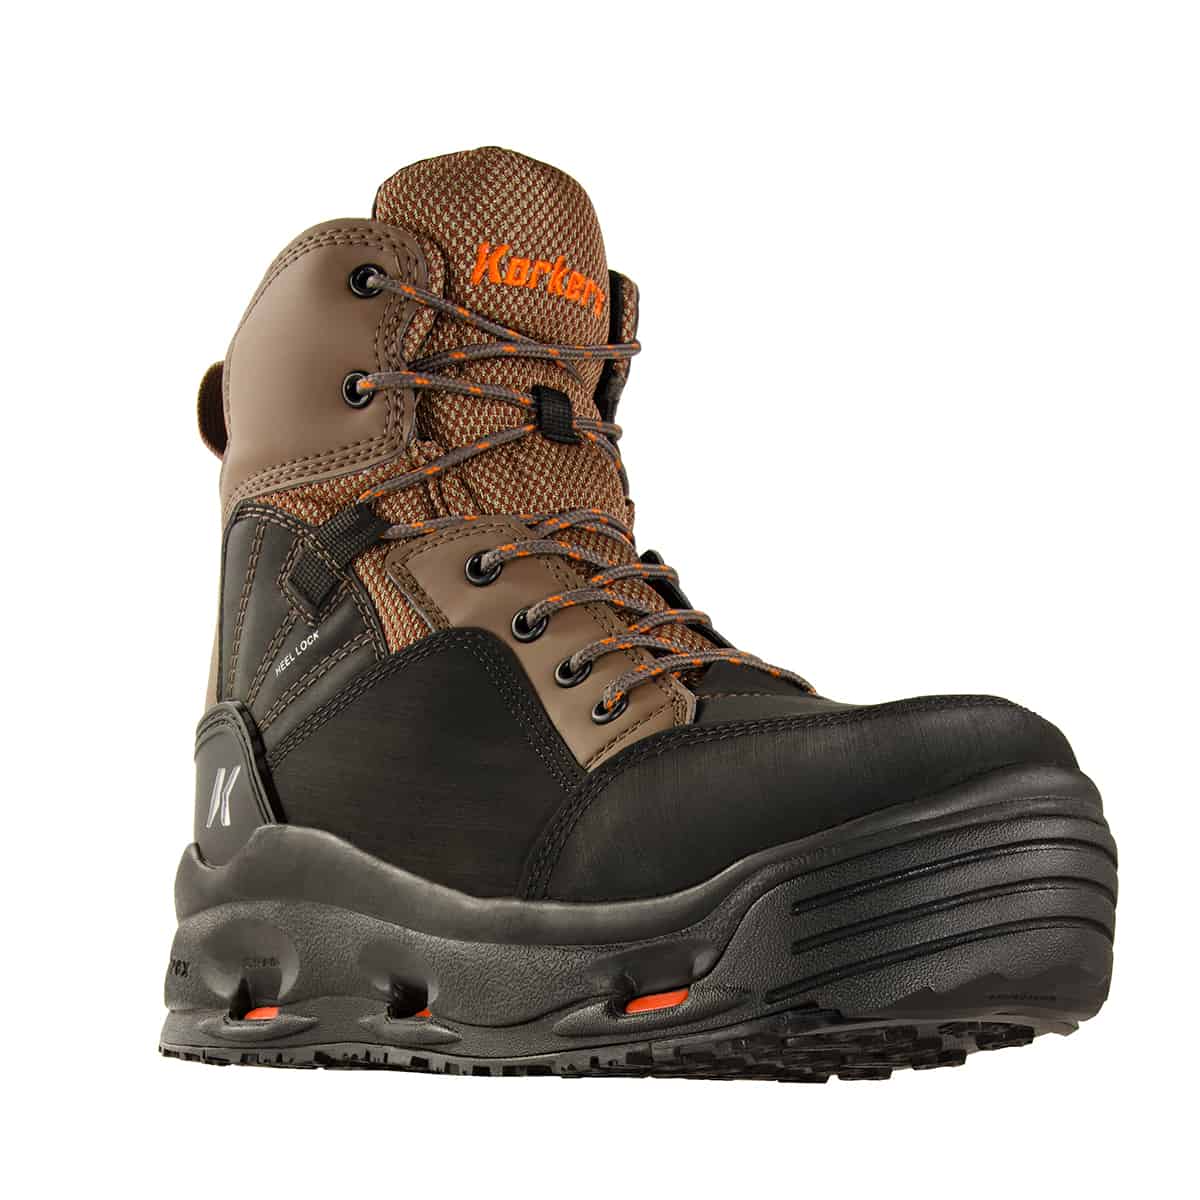 korkers buckskin wading boot 3qtr front budget friendly fly fishing boot